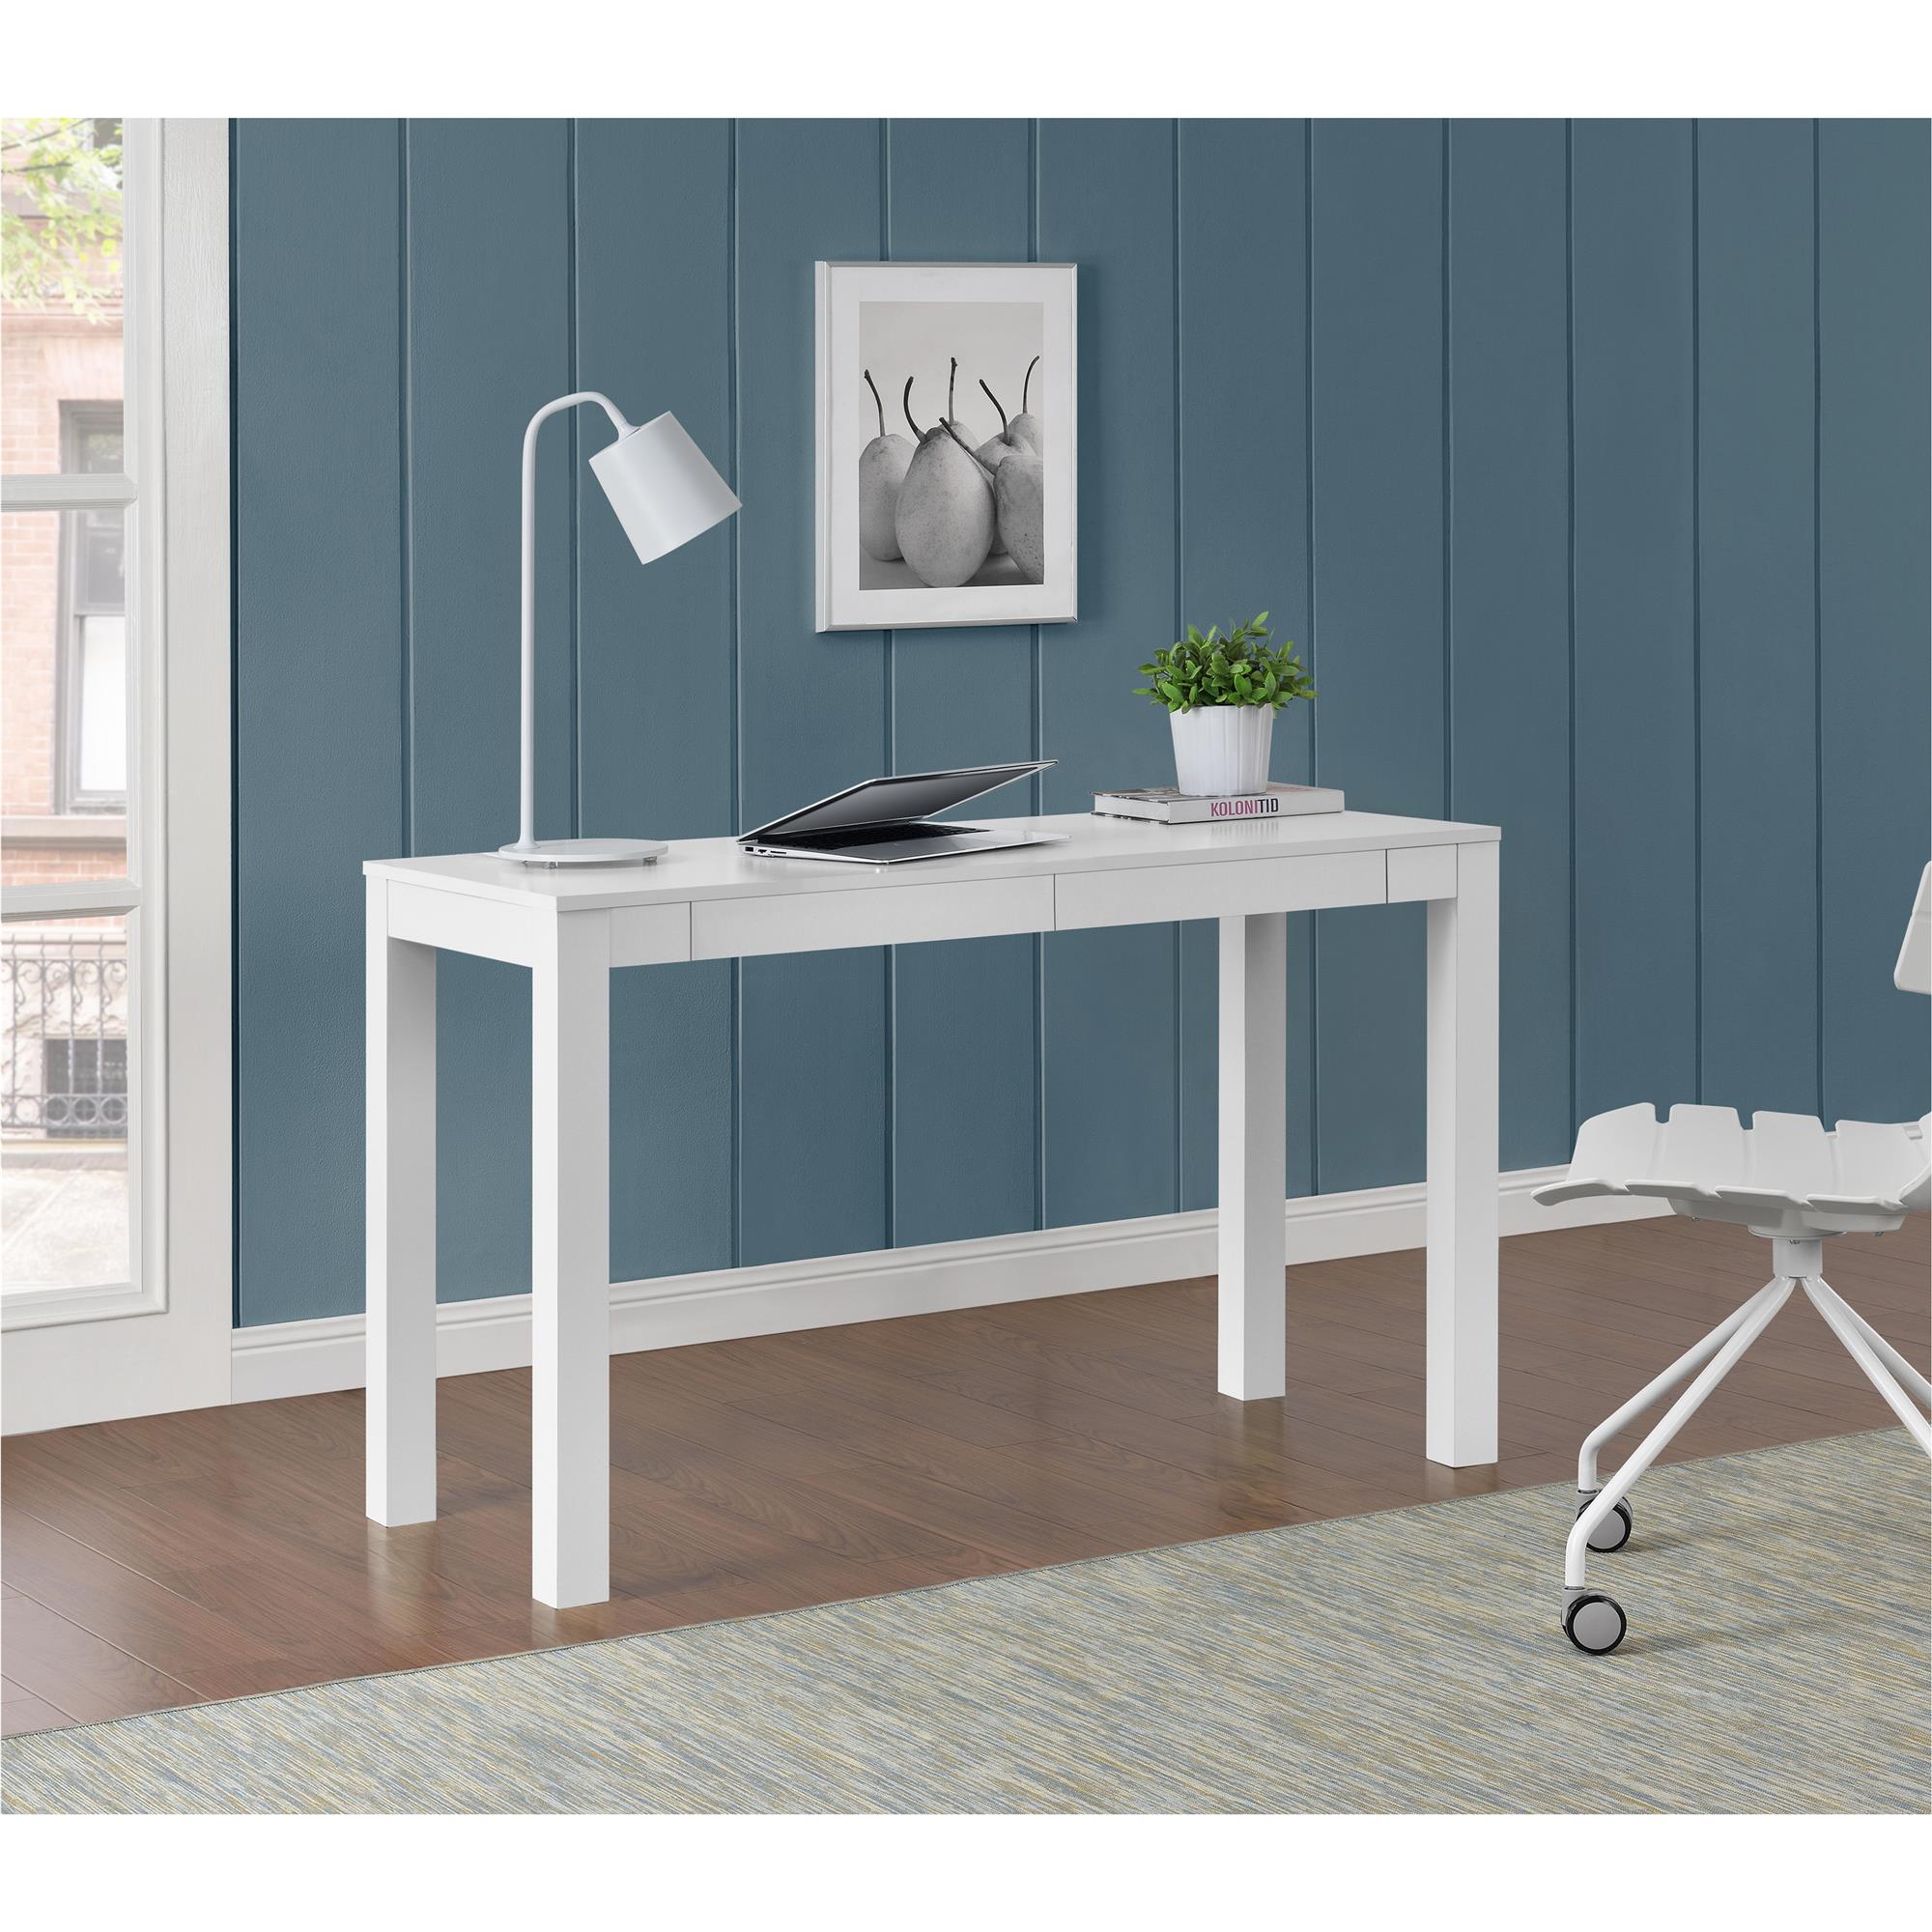 Ameriwood Home Large Parsons Computer Desk with 2 Drawers, White - image 1 of 10